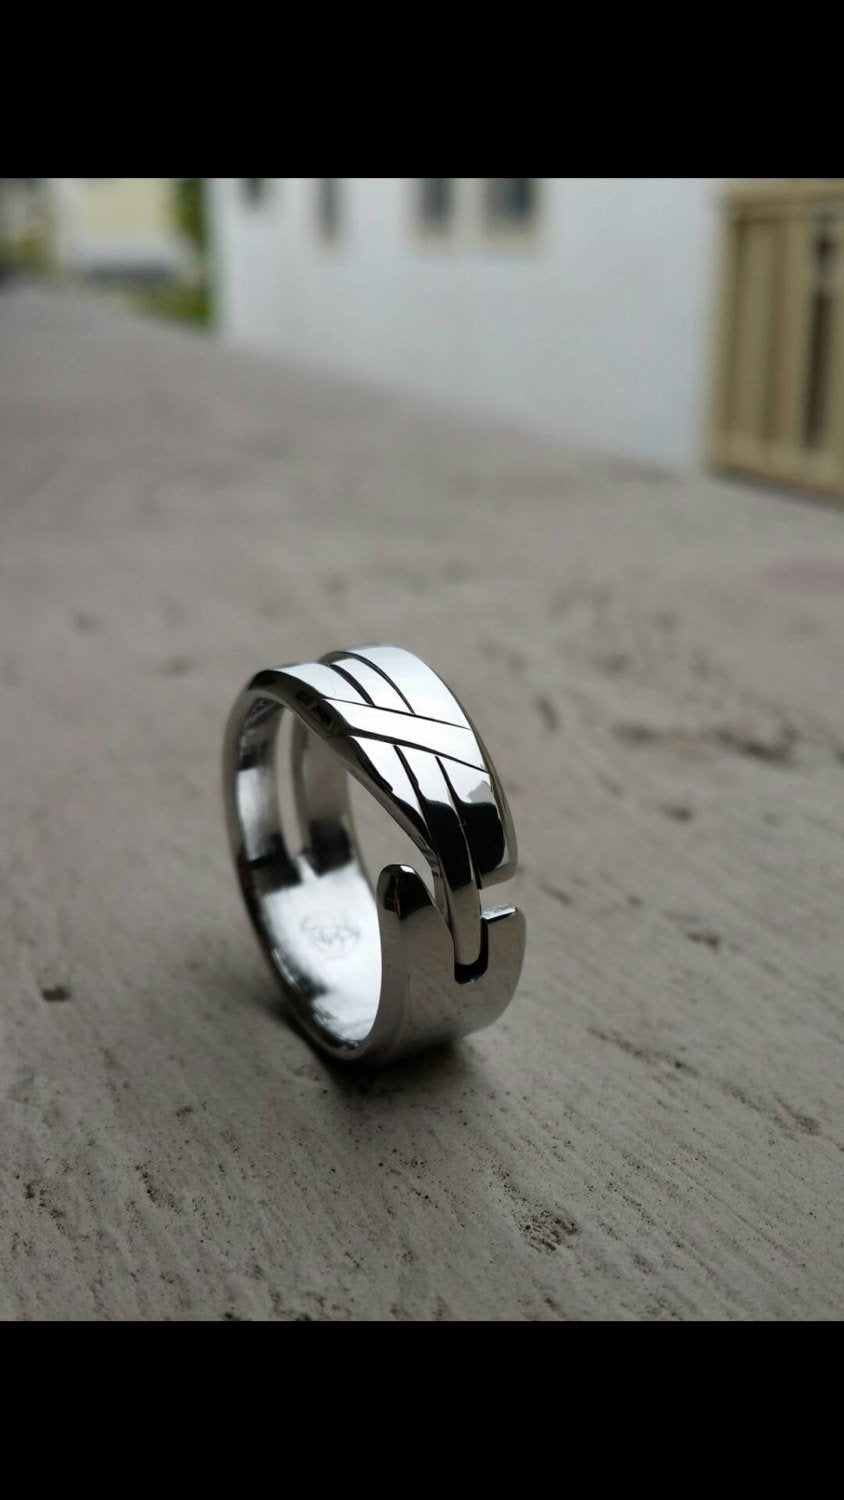 8mm 316 Titanium Steel Silver Plated Christian Ring Jesus Cross Letter  Bible Silver Wedding Gold Tungsten Rings Women Wholesale From Hotjewelry11,  $2.75 | DHgate.Com